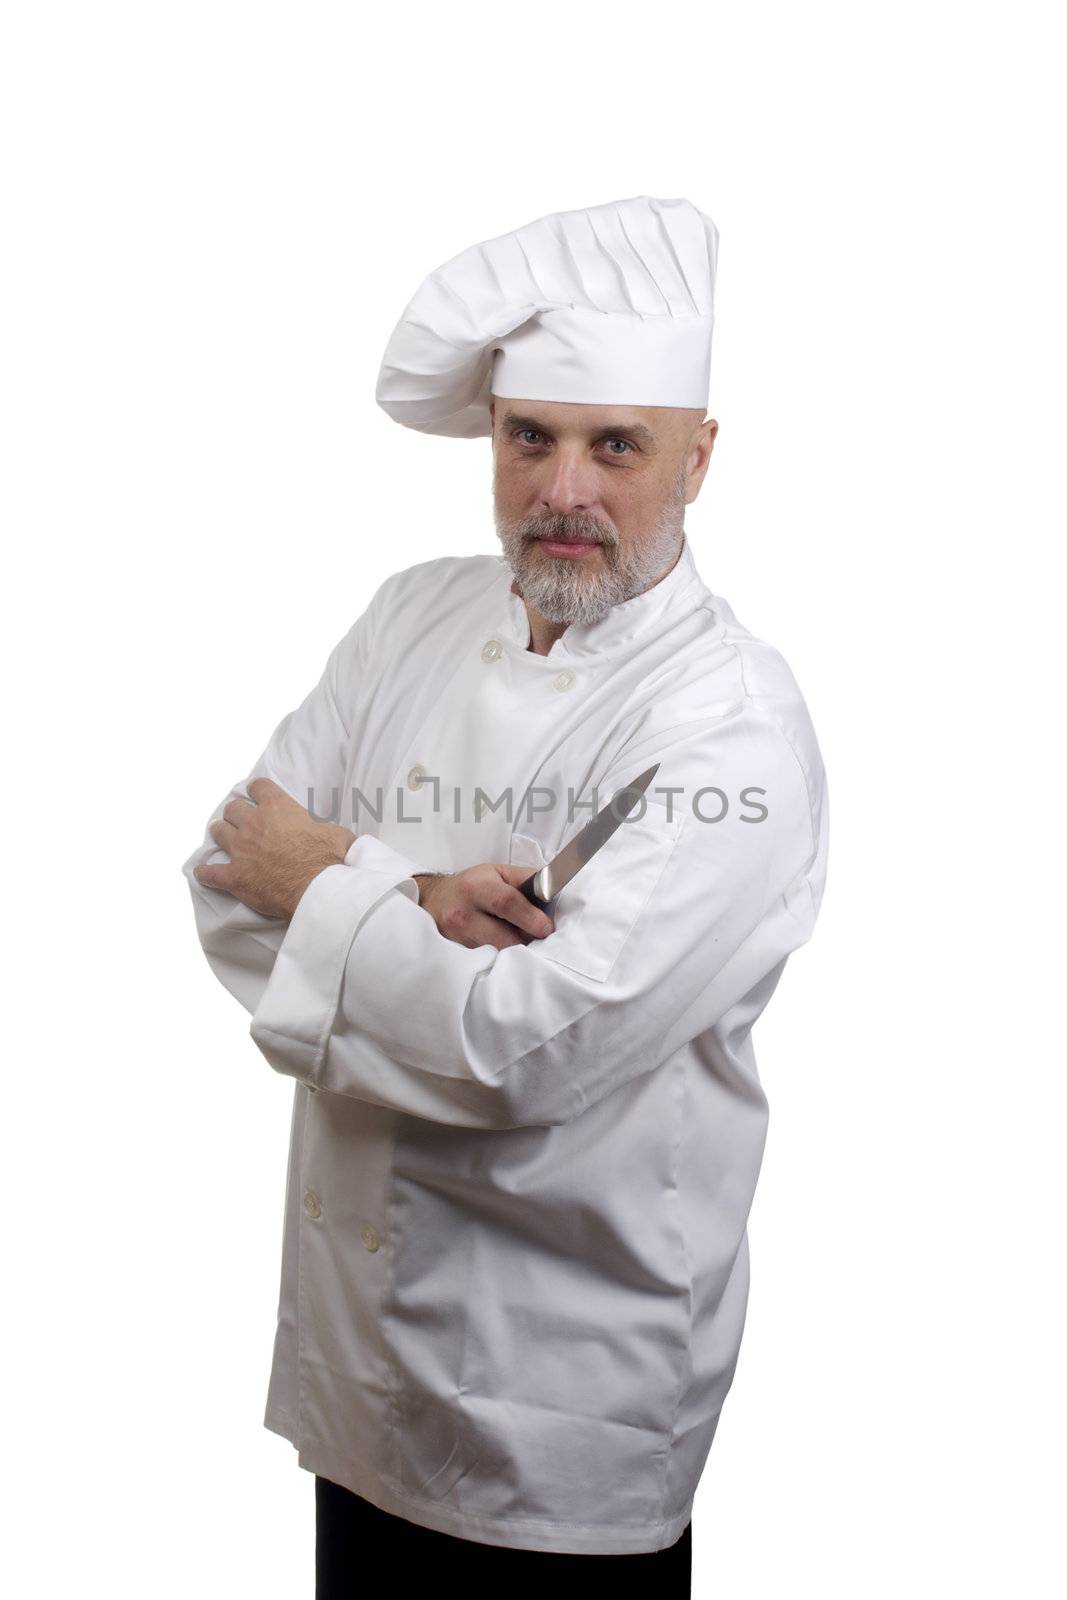 Portrait of a chef with crossed arms and a knife in a chef's hat and uniform isolated on a white background.